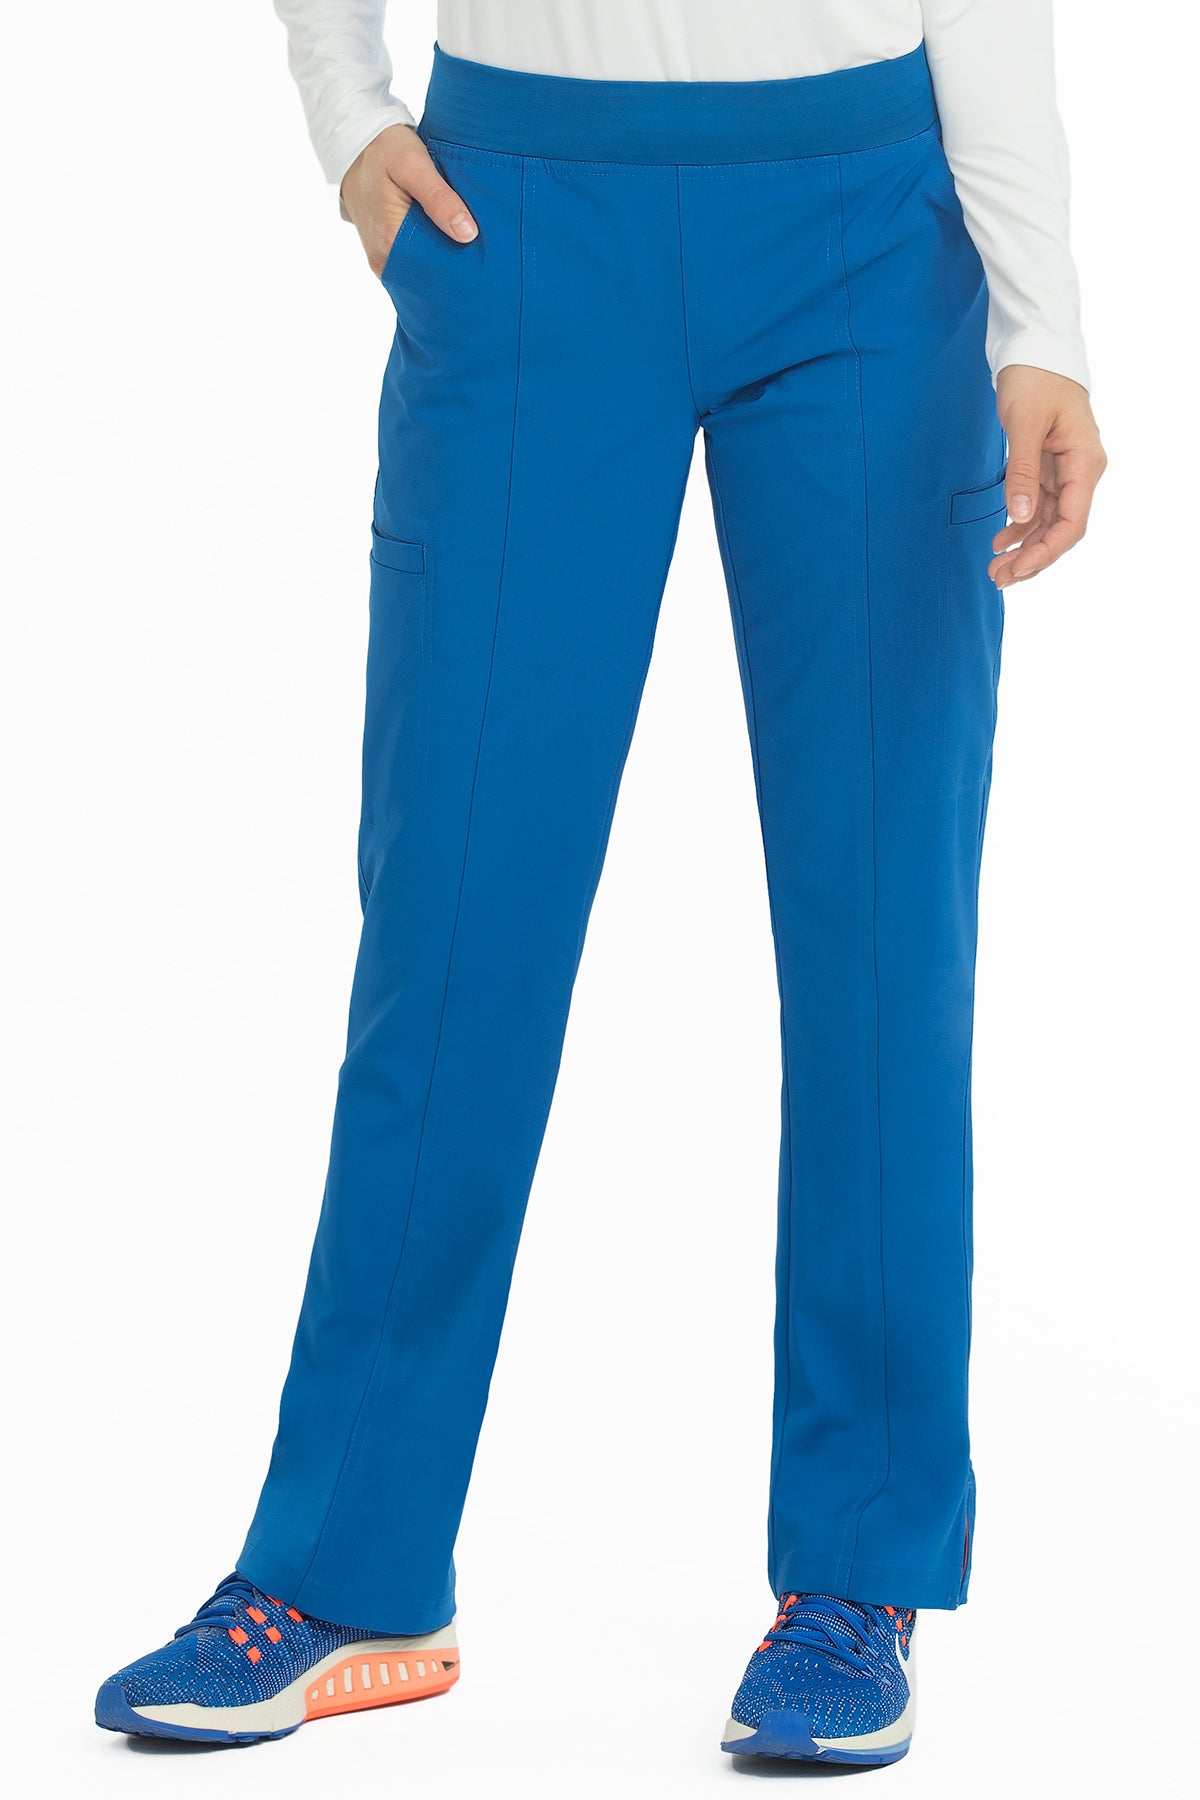 Yoga 2 Cargo Pocket Pant by Med Couture (Regular) XS-5XL /  Royal